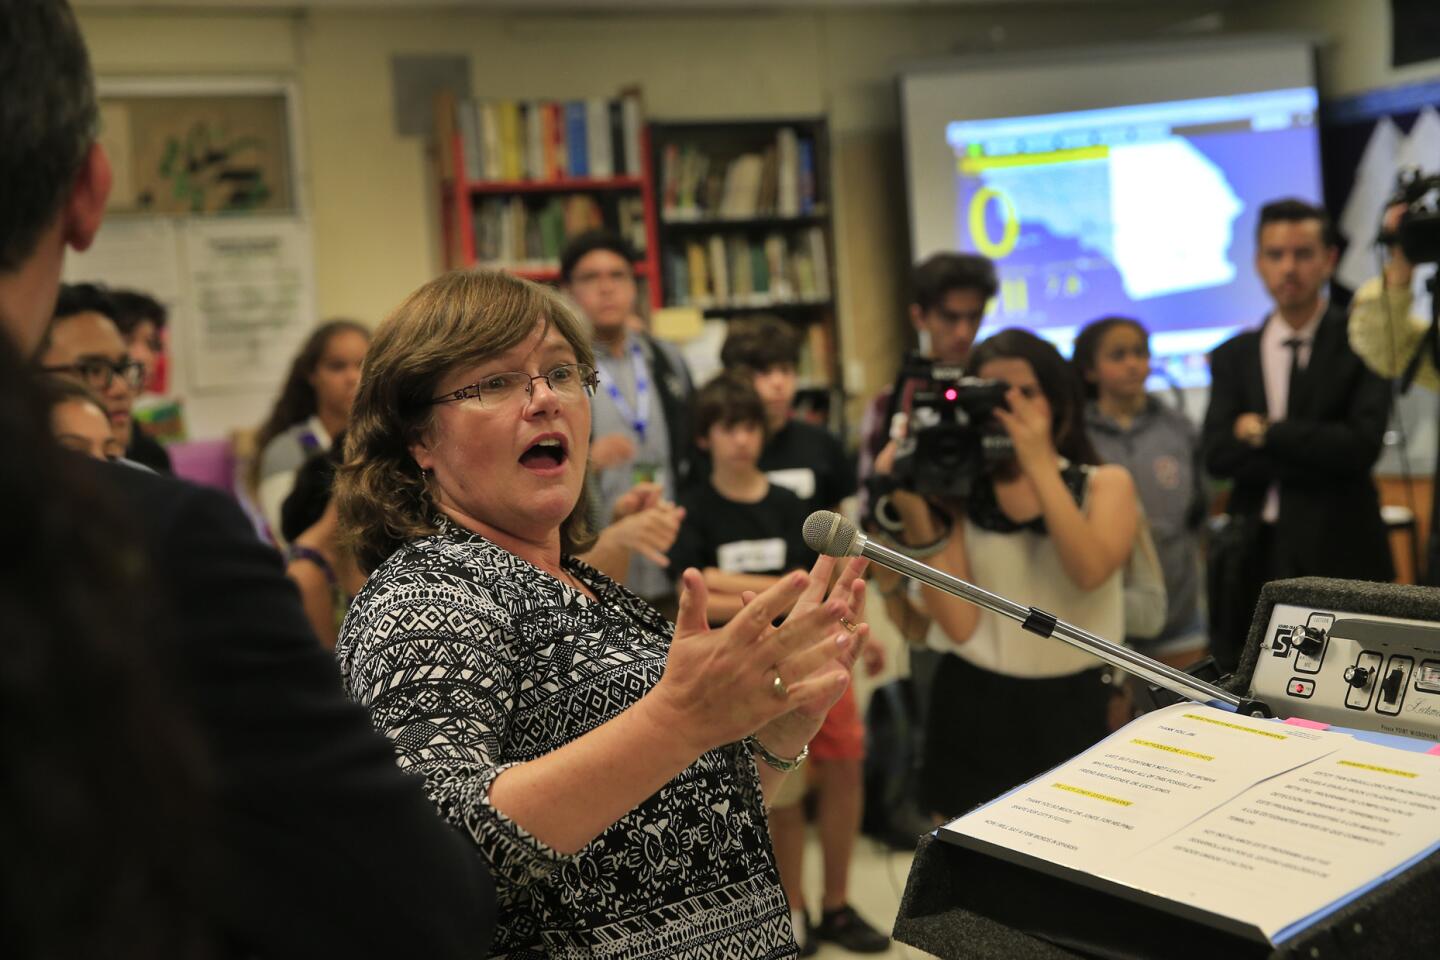 Eagle Rock High School students listen as seismologist Lucy Jones, center, speaks about a collaboration in 2015 between the city of Los Angeles, the Los Angeles Unified School District and the United States Geological Survey for a pilot program that will install early warning earthquake software in all science classrooms at the school.